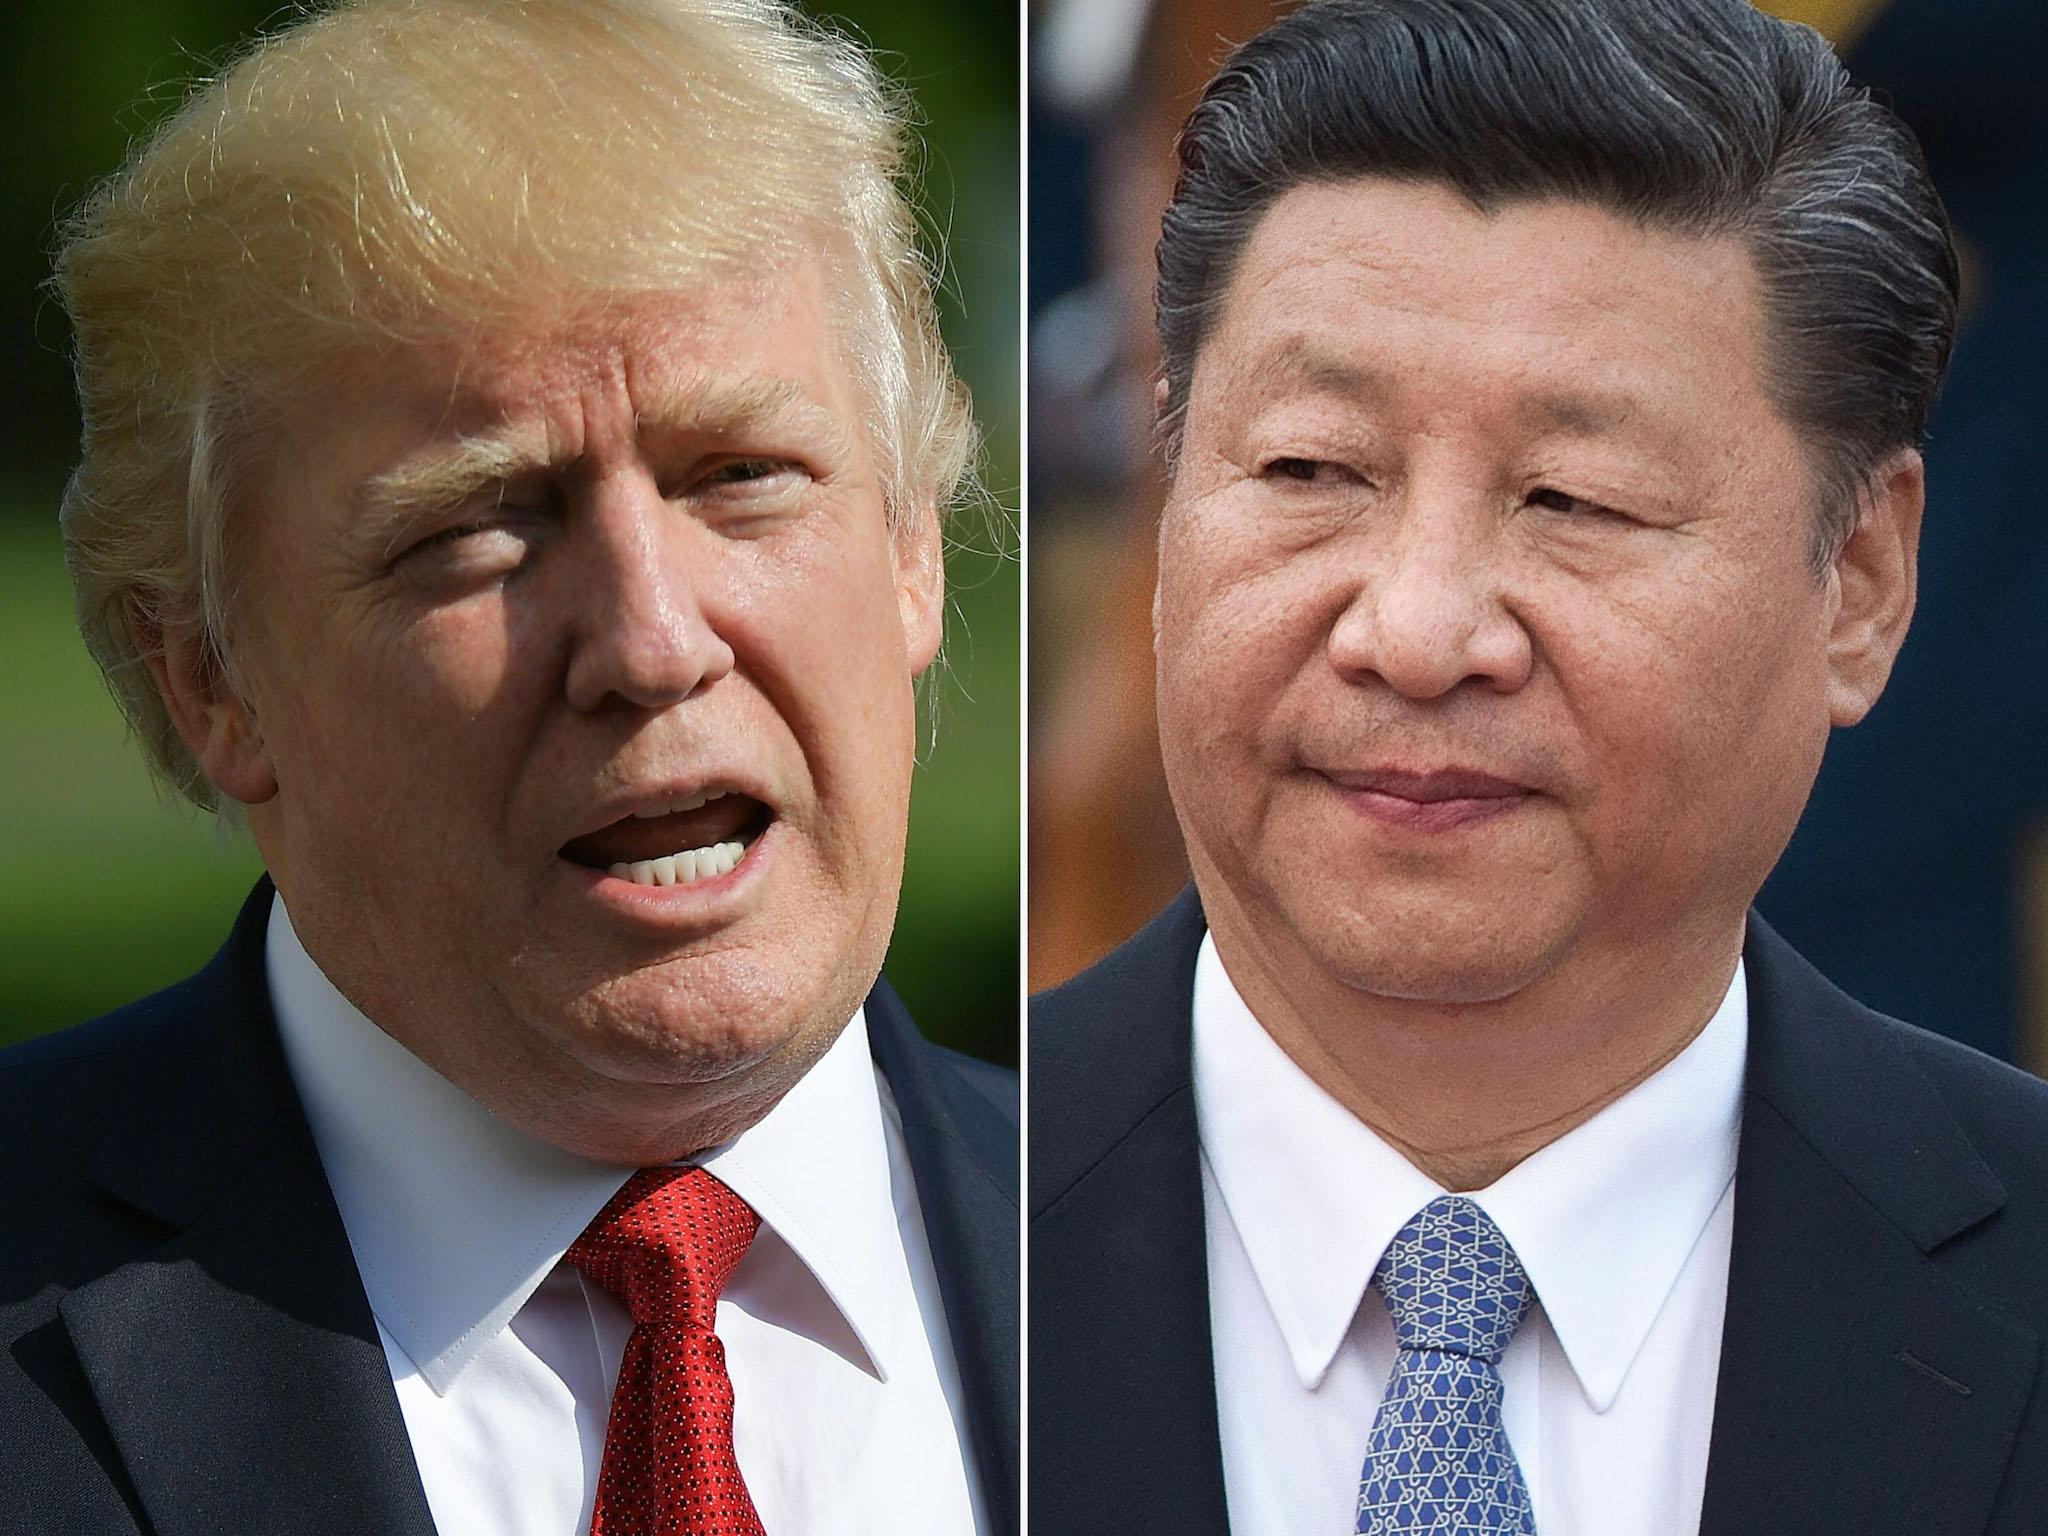 US President Donald Trump and his Chinese counterpart Xi Jinping